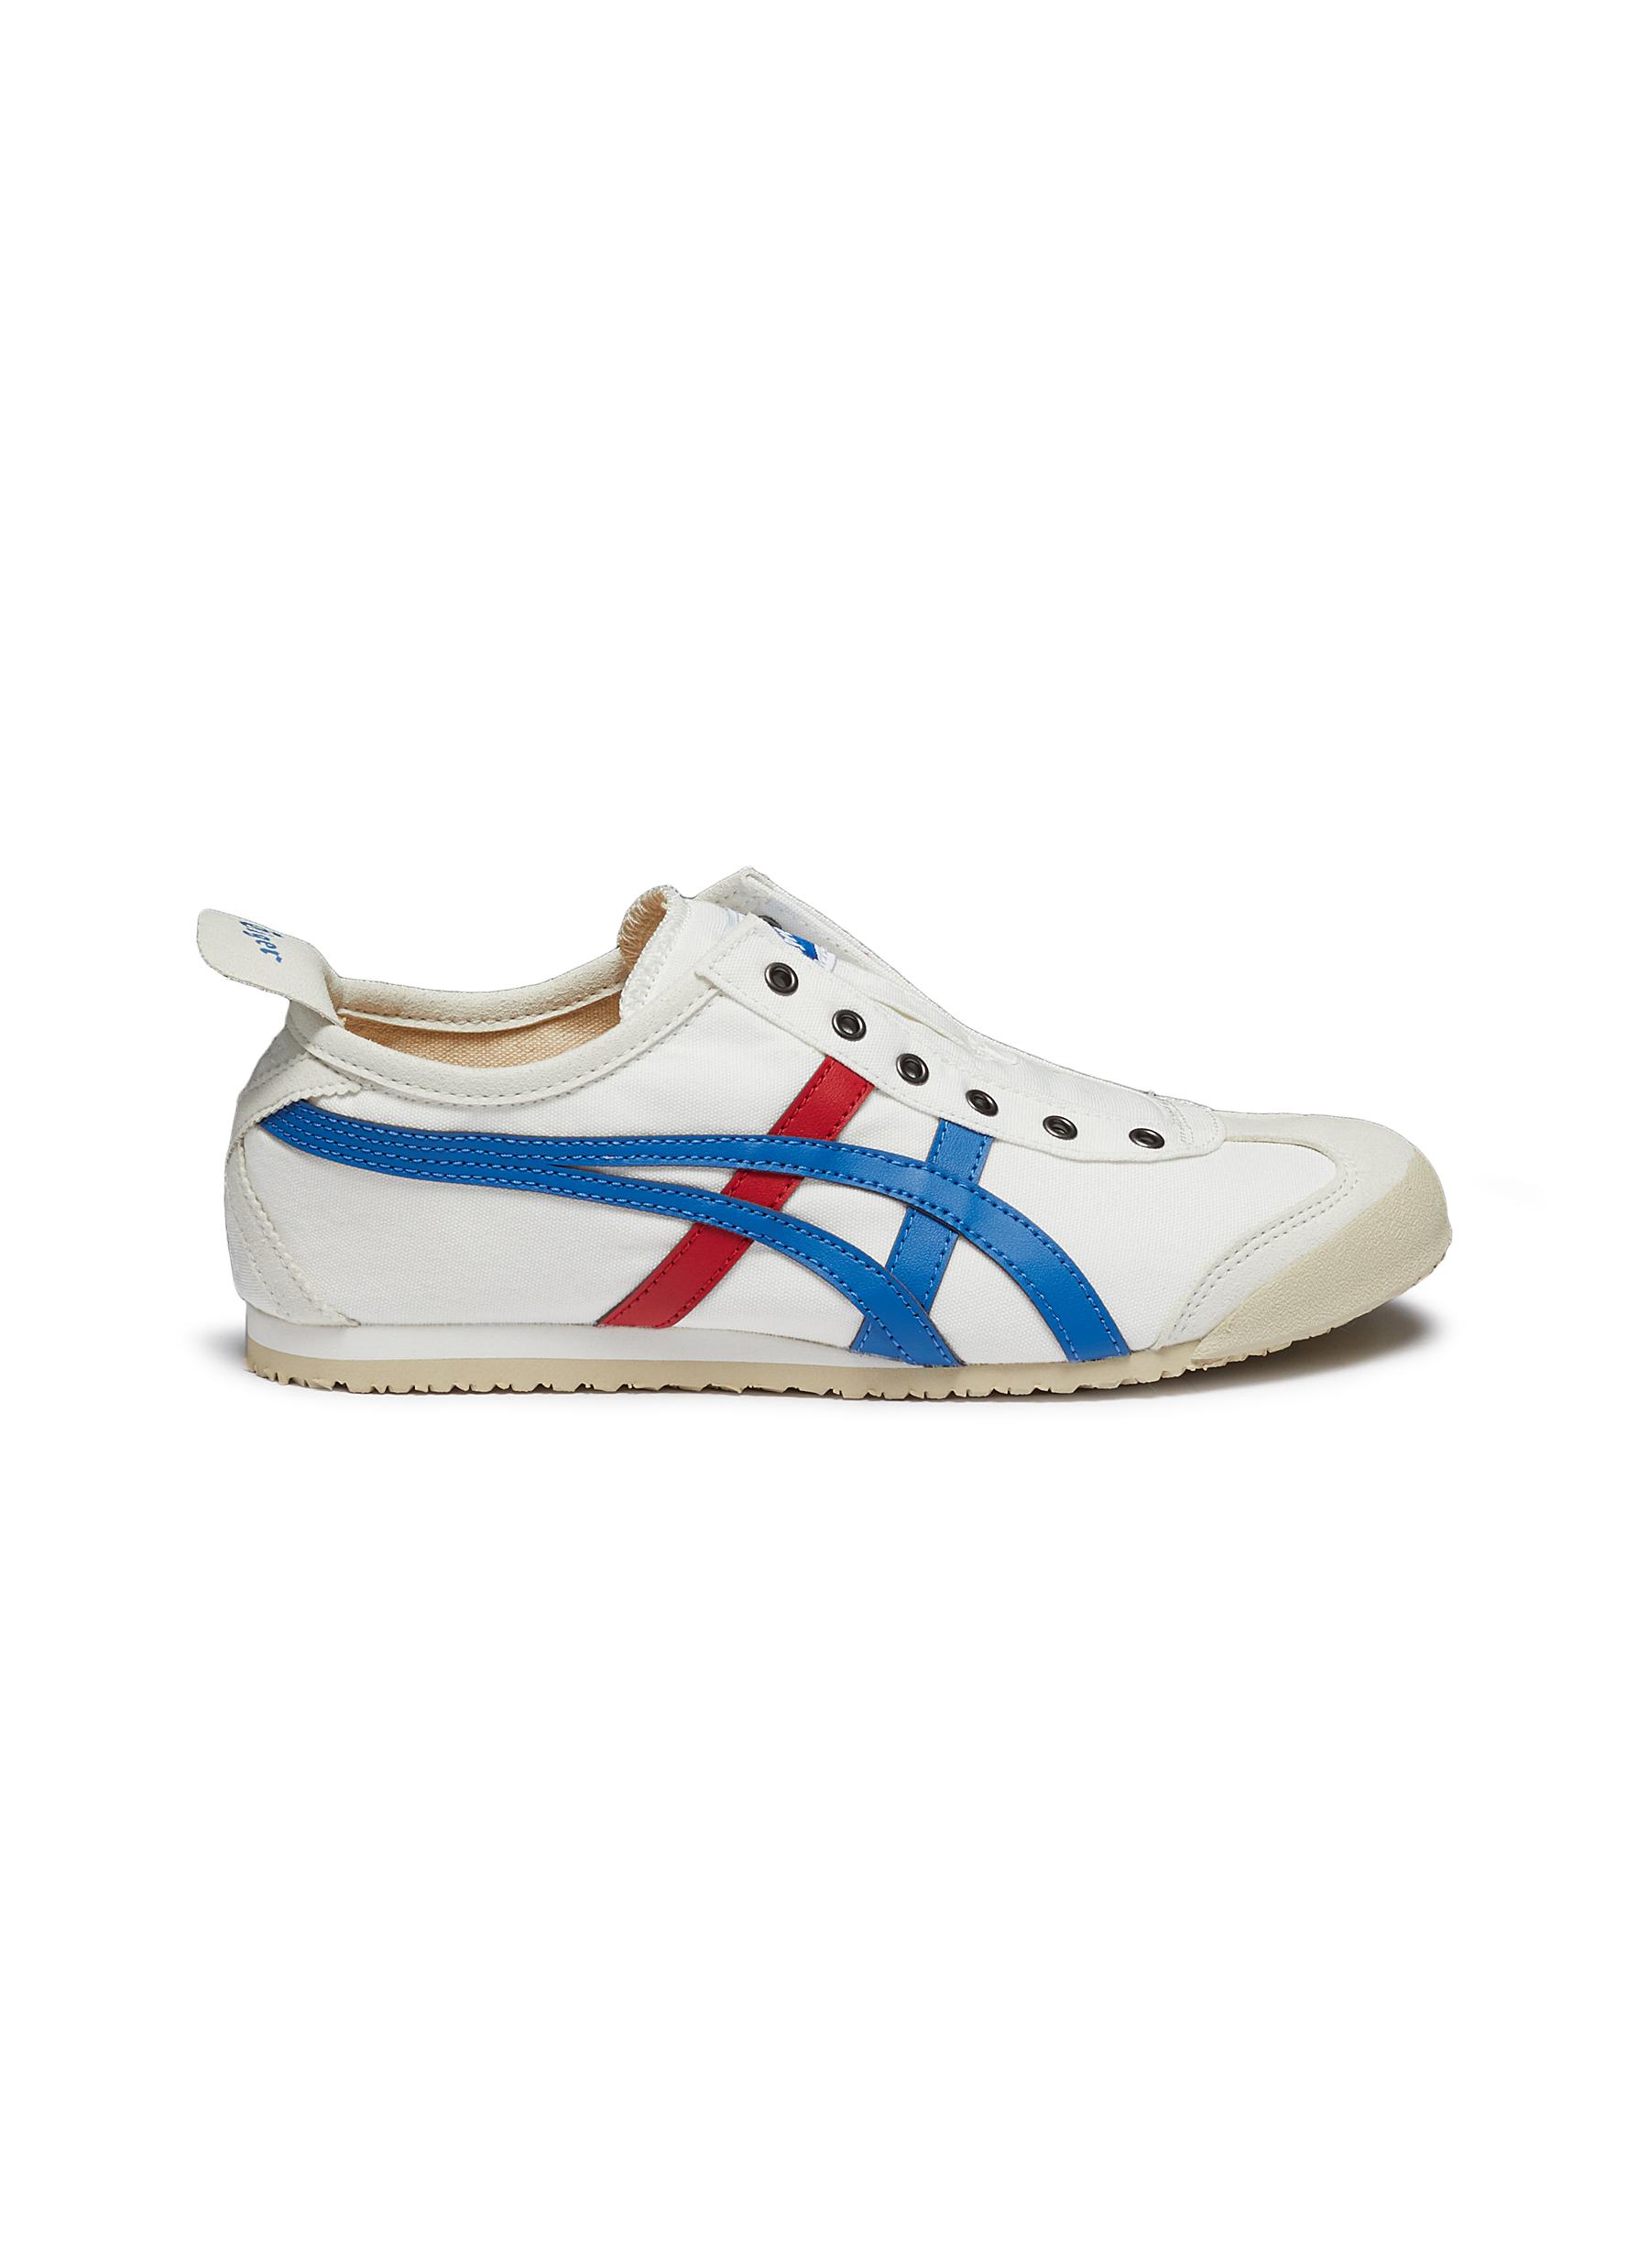 images of onitsuka tiger shoes